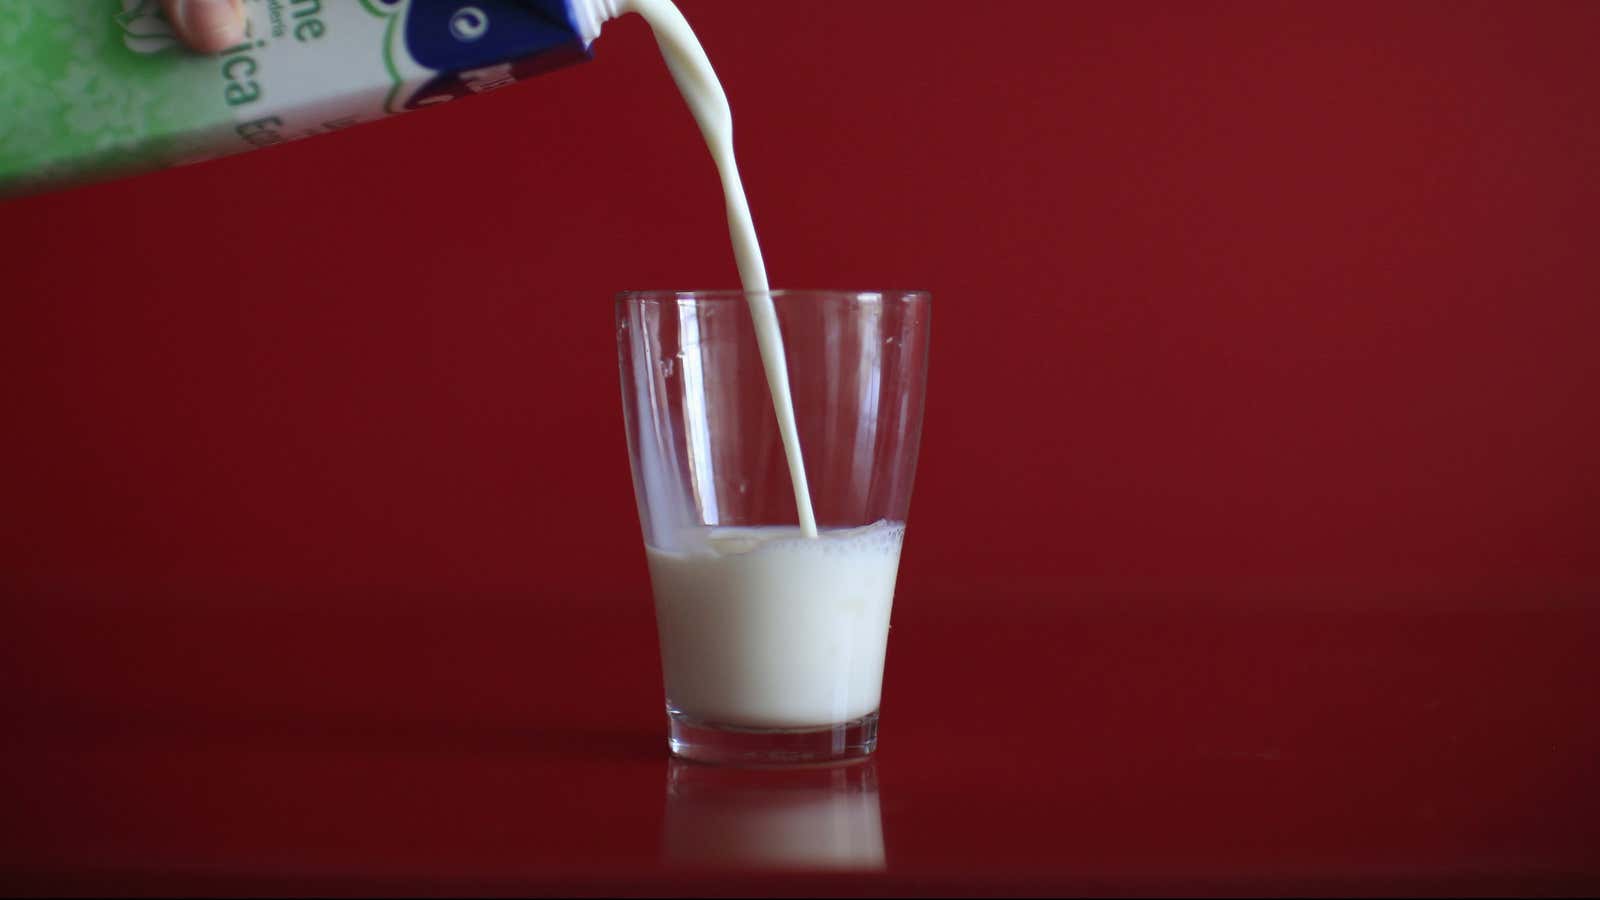 Because of the dangers related to raw milk, its sale is often strictly regulated.